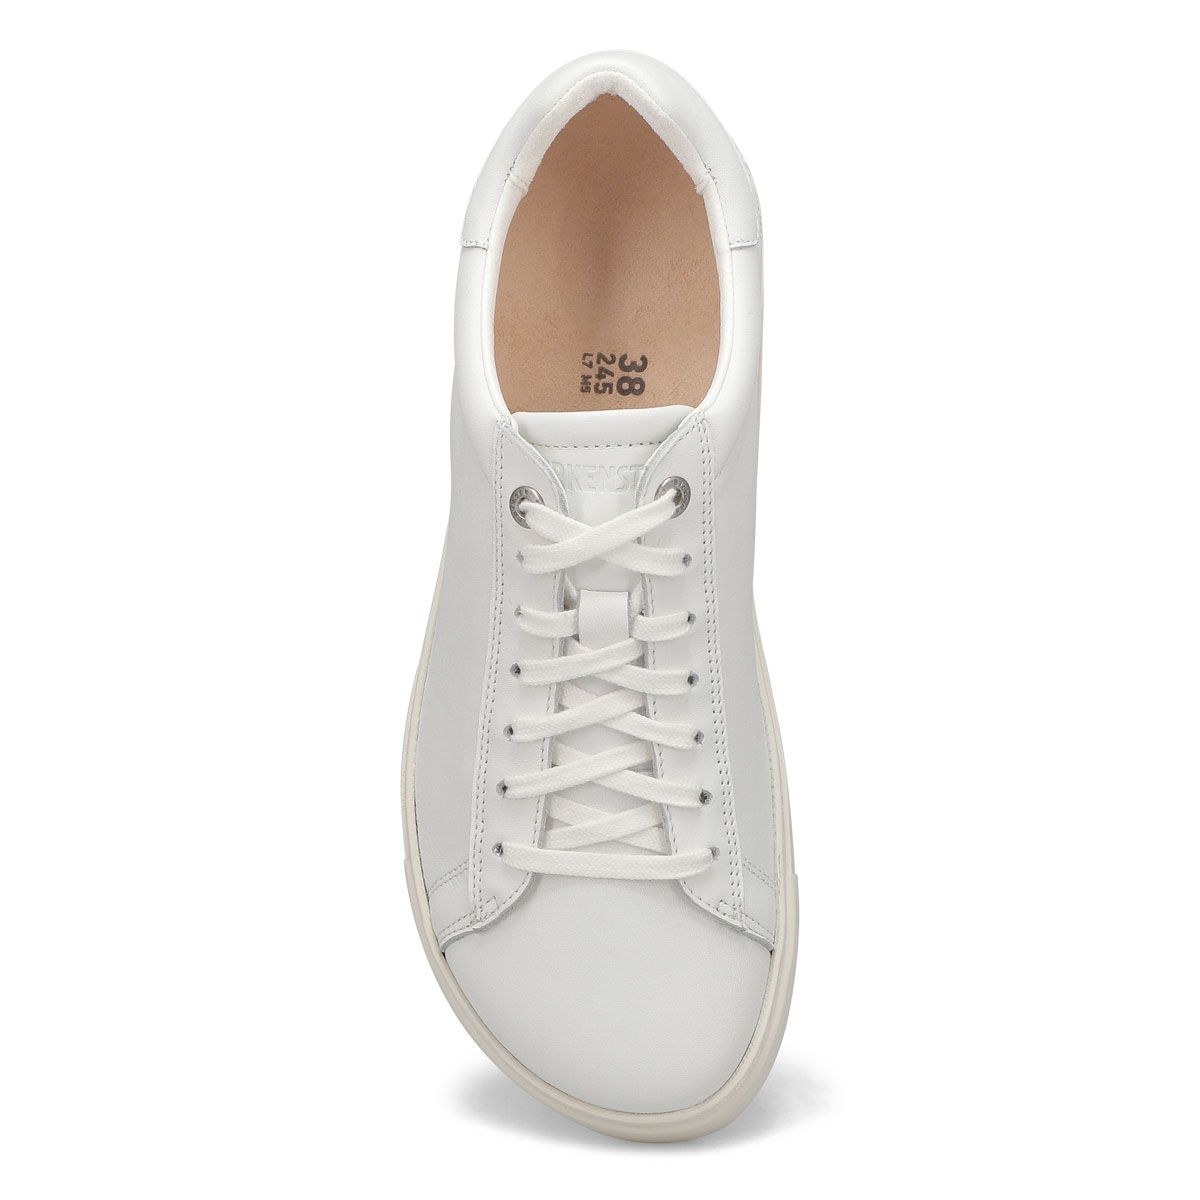 Womens Bend Lace Up Sneaker - White